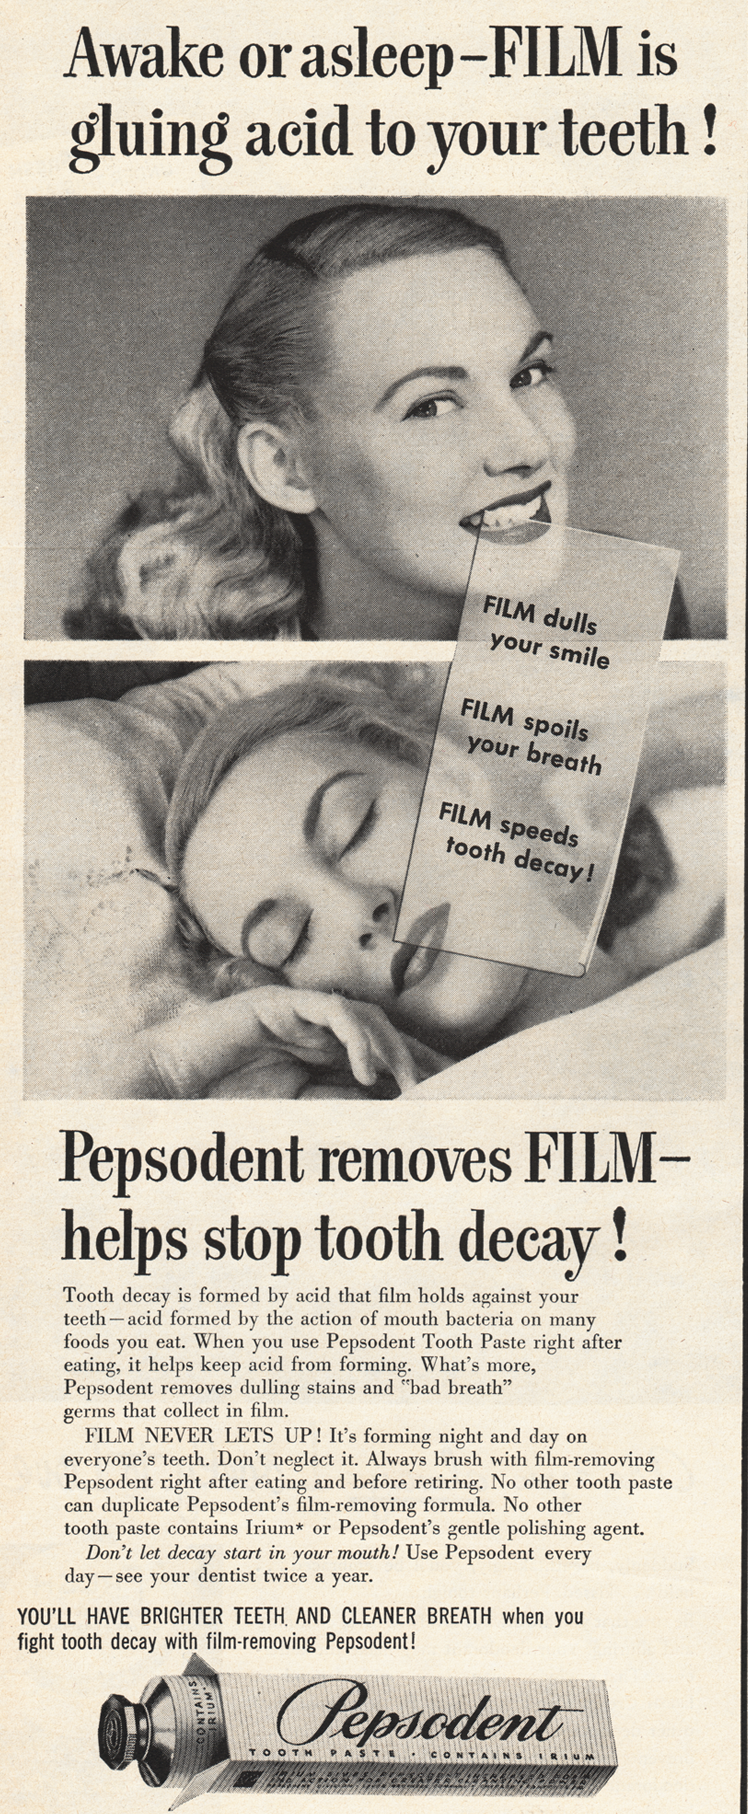 Pepsodent advertisement from 1950, highlighting the cue for the habit of brushing teeth: tooth film (courtesy of vintage-adventures.com)